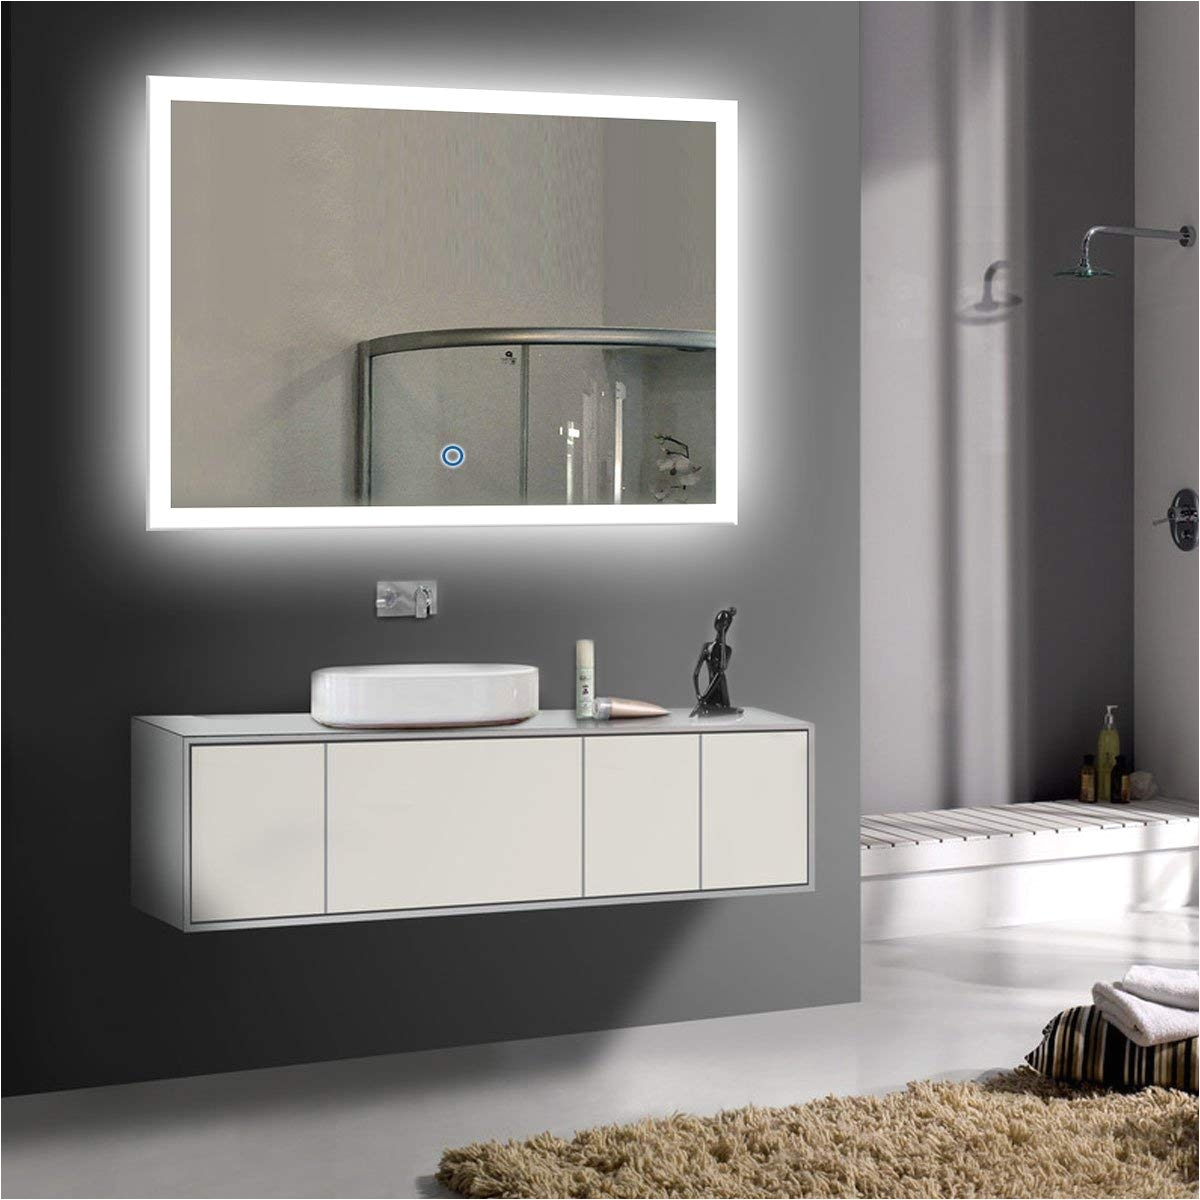 amazon com 36 x 28 in horizontal led bathroom silvered mirror with touch button c n031 i home kitchen